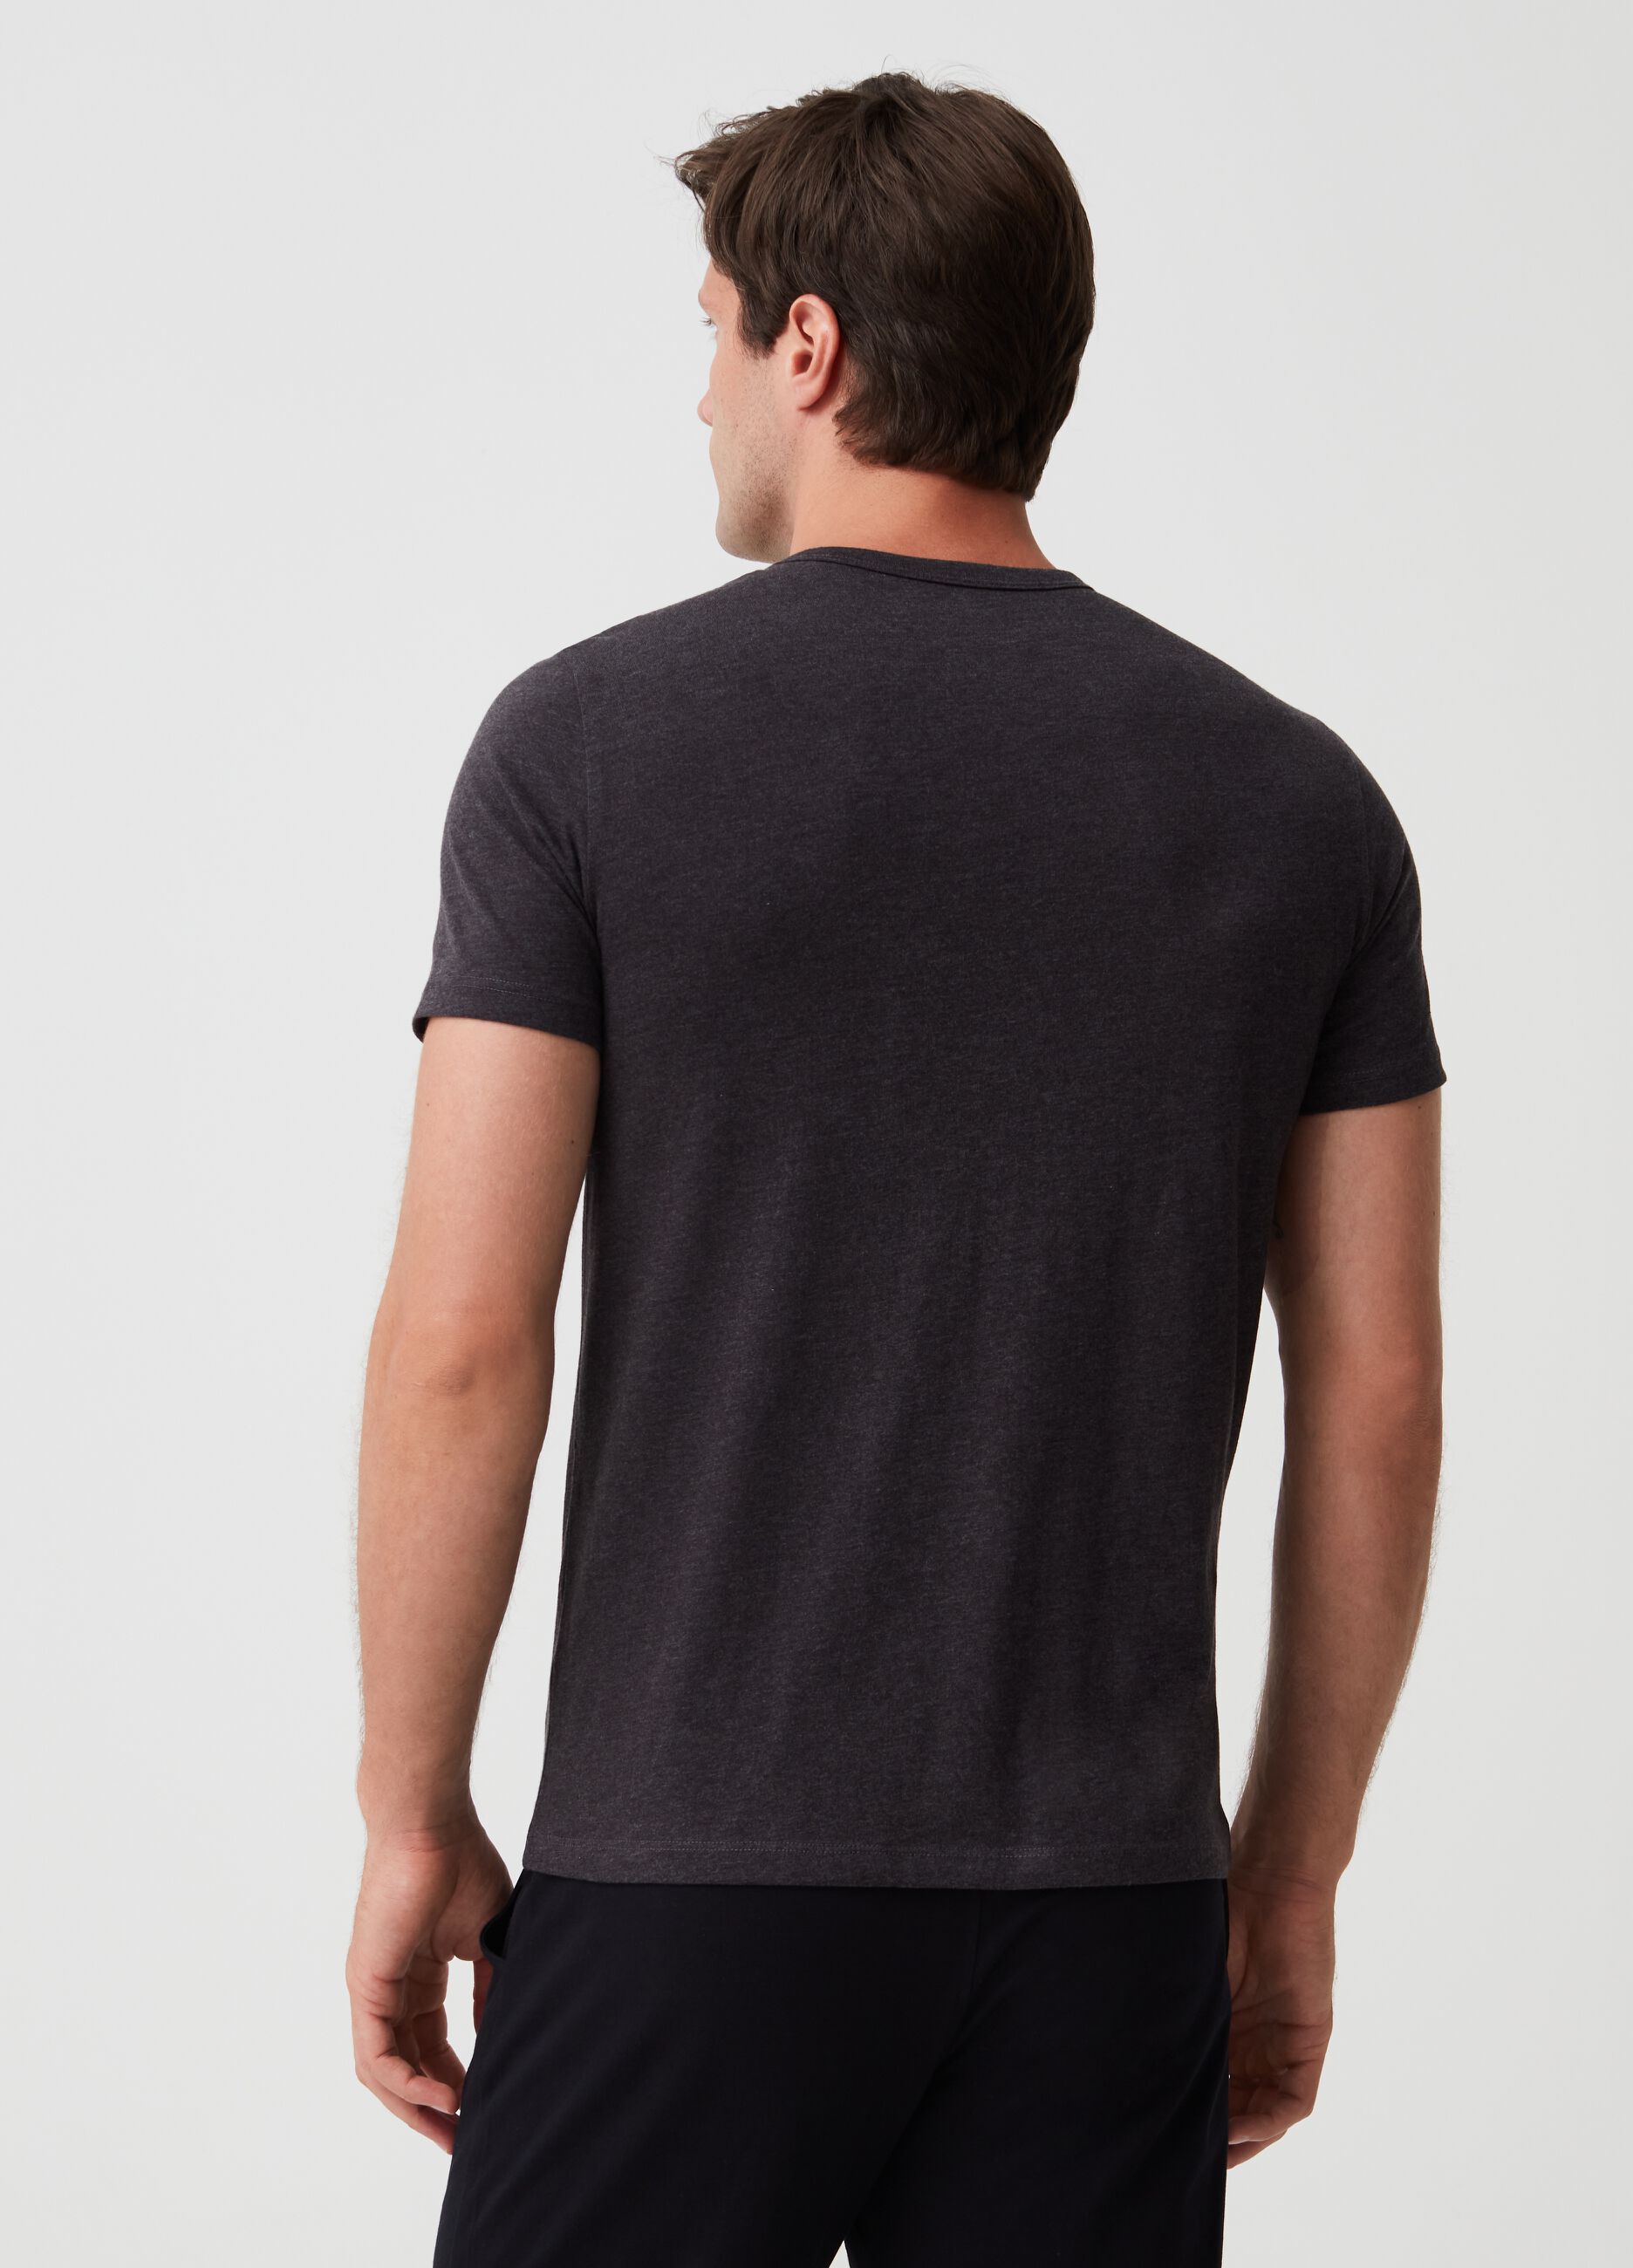 Bipack t-shirt intima in jersey mélange